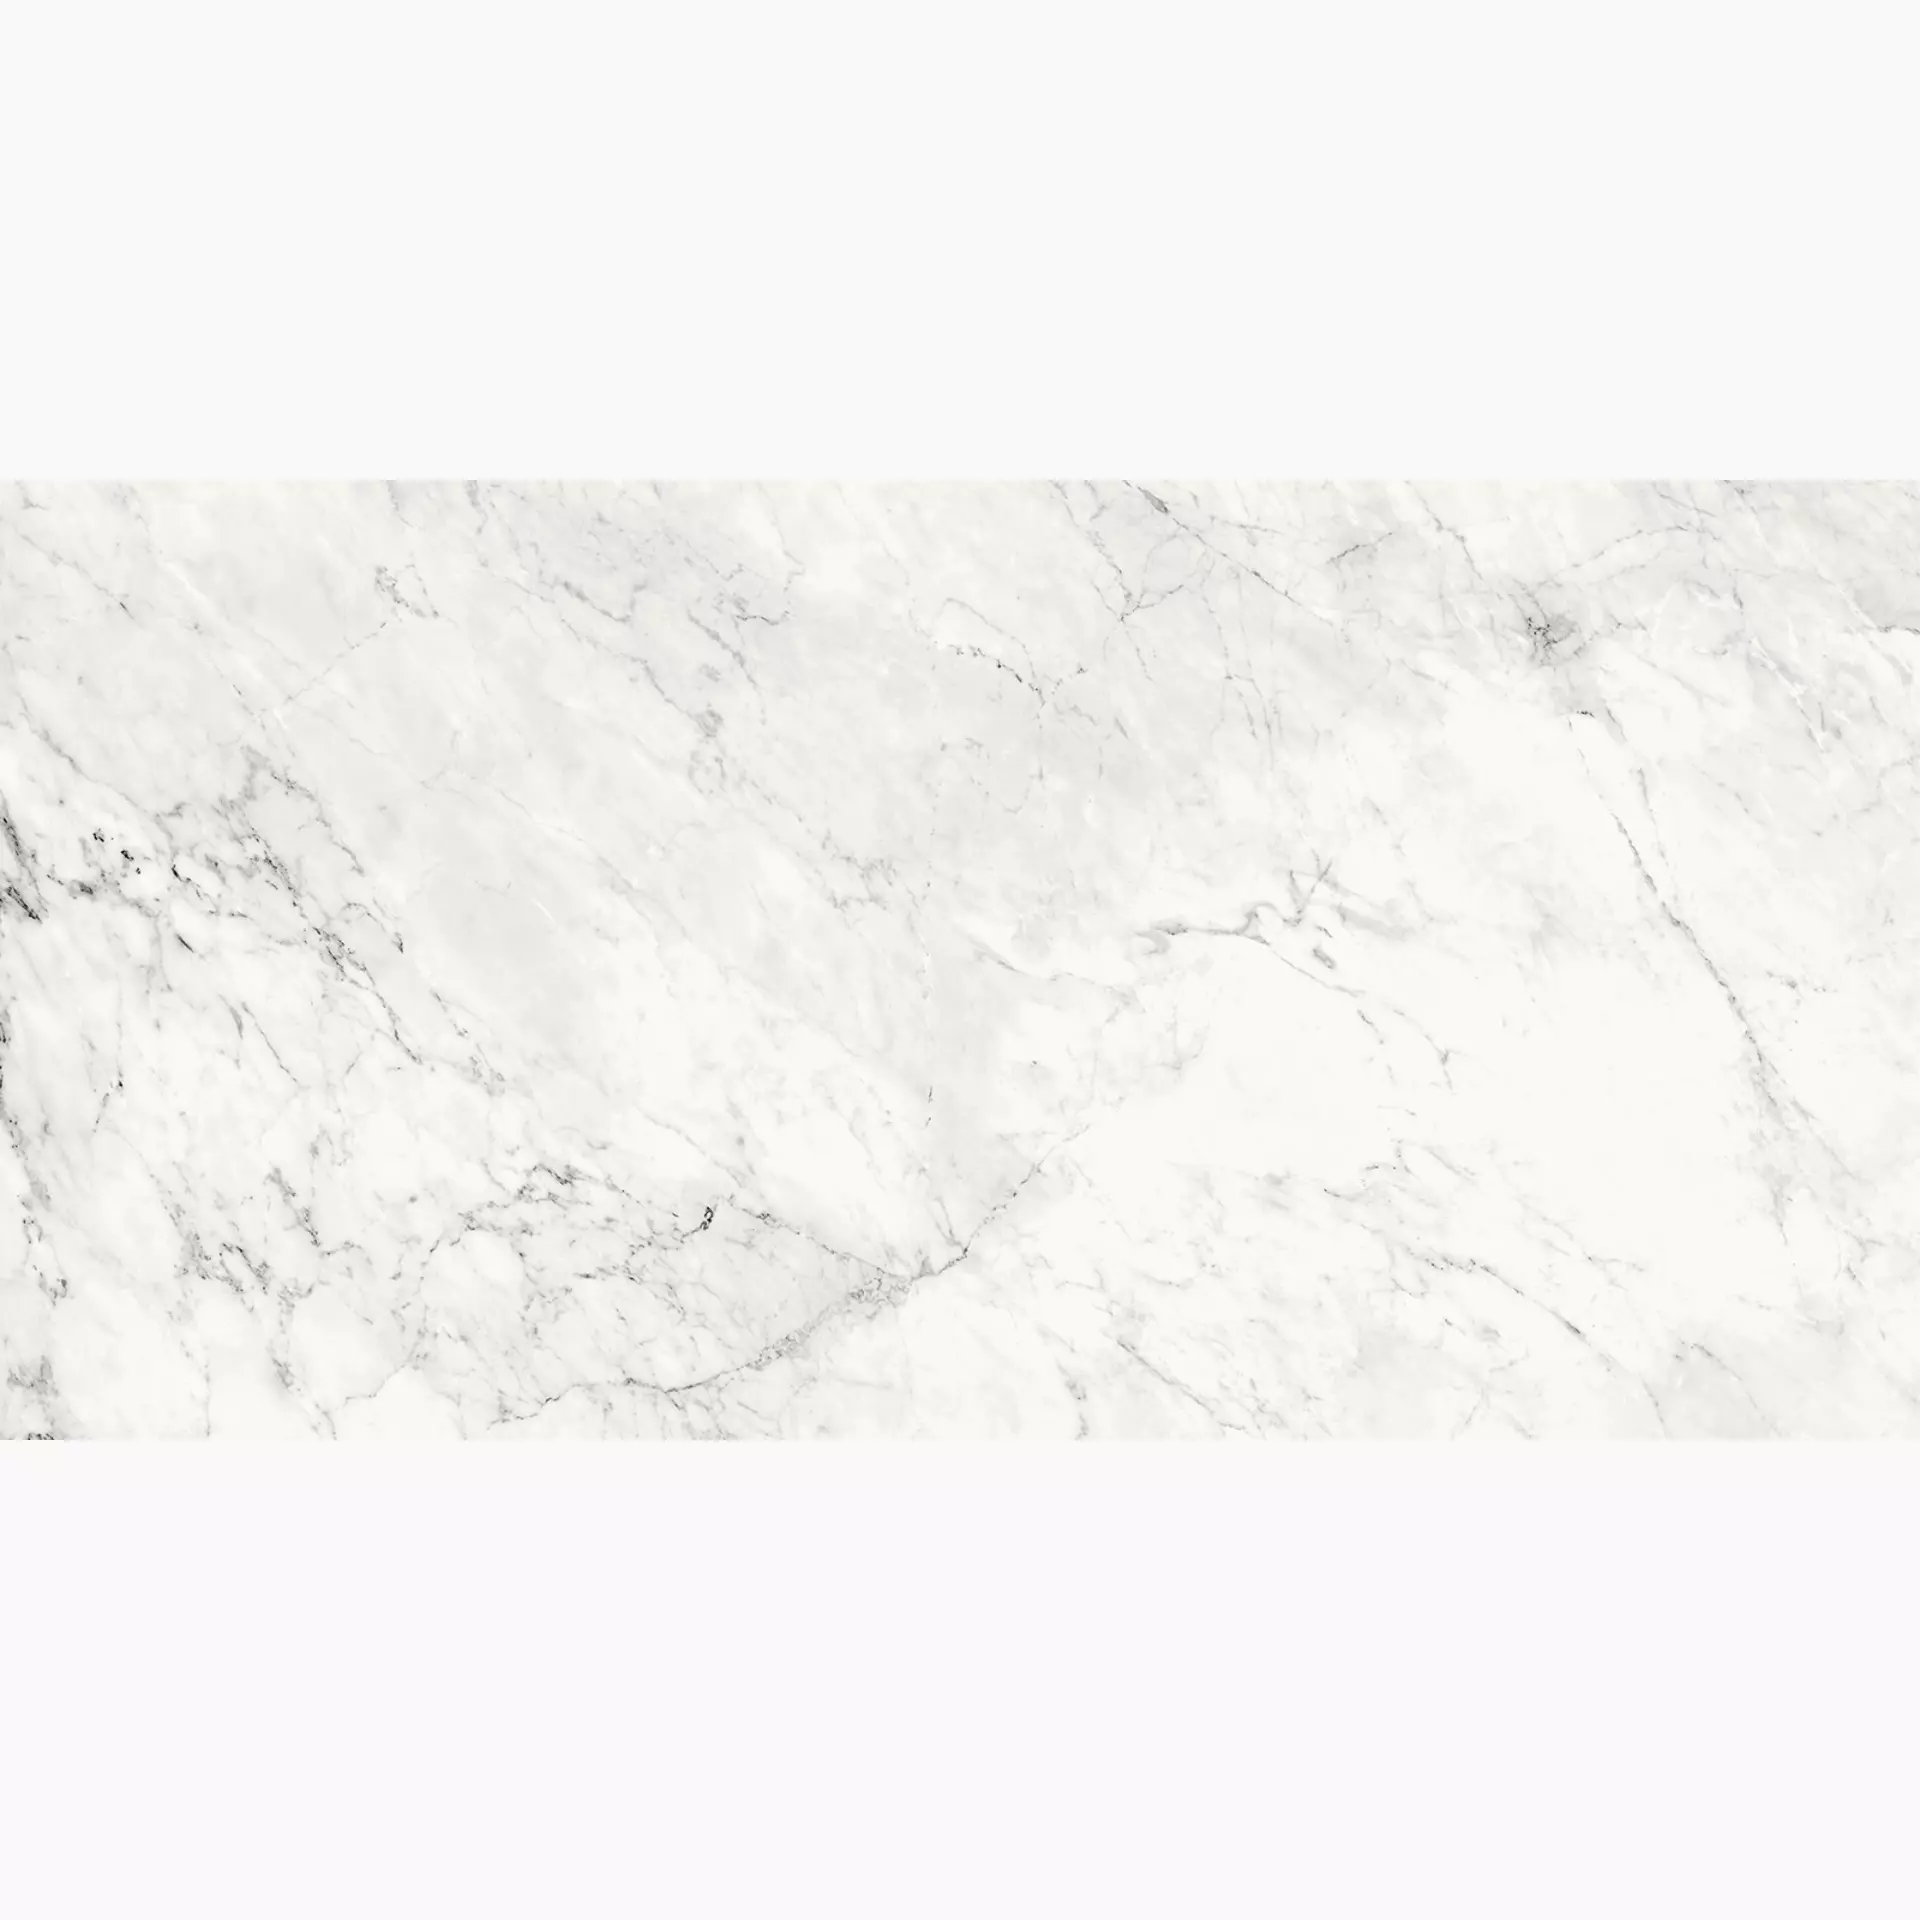 La Faenza Aesthetica White Honed Flat Glossy 179385 60x120cm rectified 6,5mm - AE CAL6 12 LP